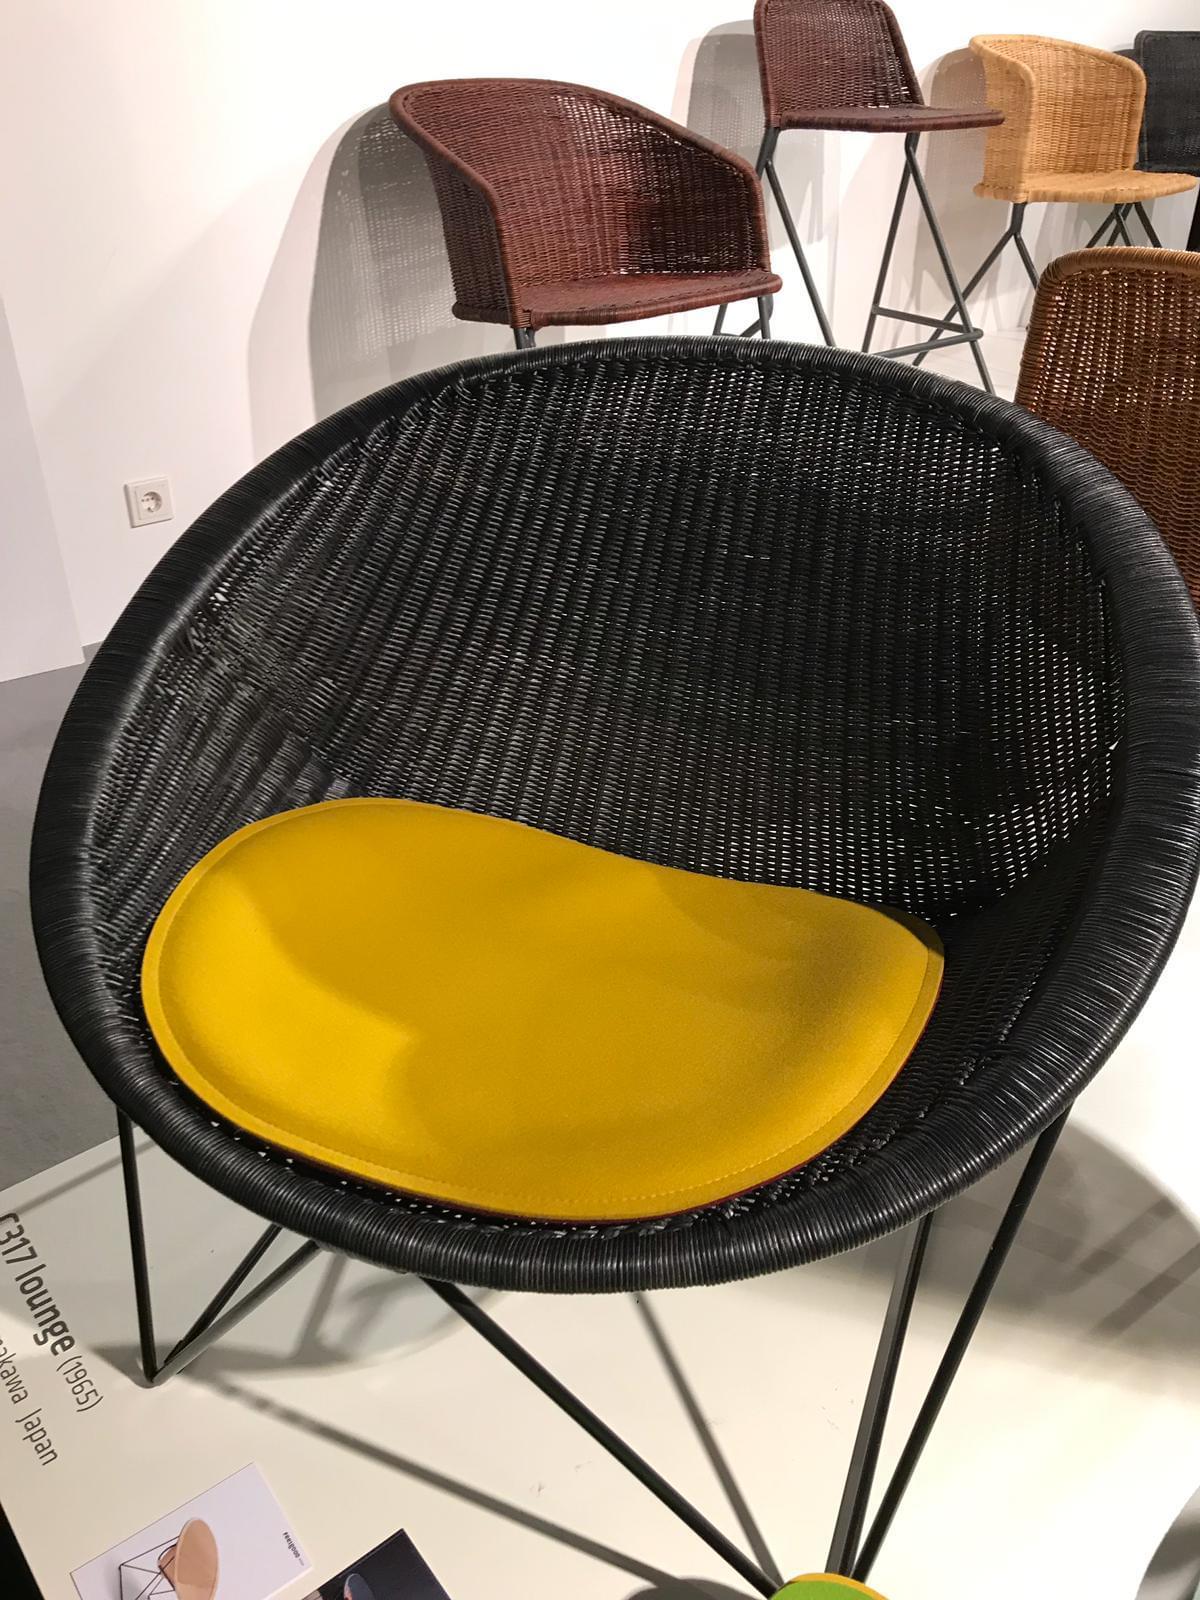 IMM-Cologne-2019-rattan-lounge-chair-in-black-with-contrasting-seat.JPG#asset:180293